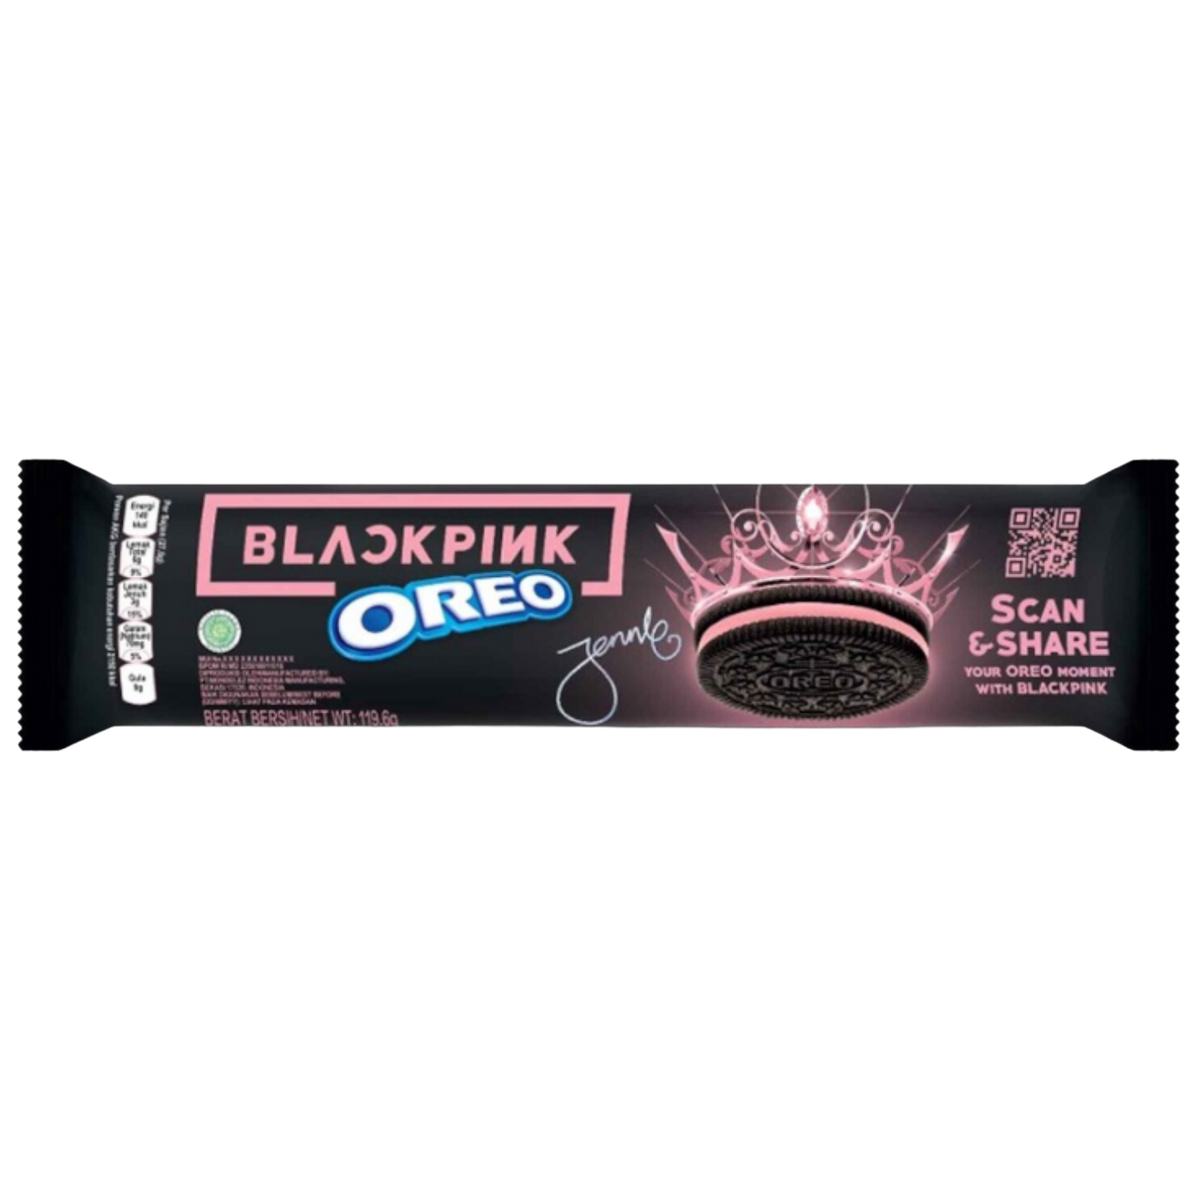 OREO x BLACKPINK Limited Edition - Strawberry Creme Cookies - 119.6g ...